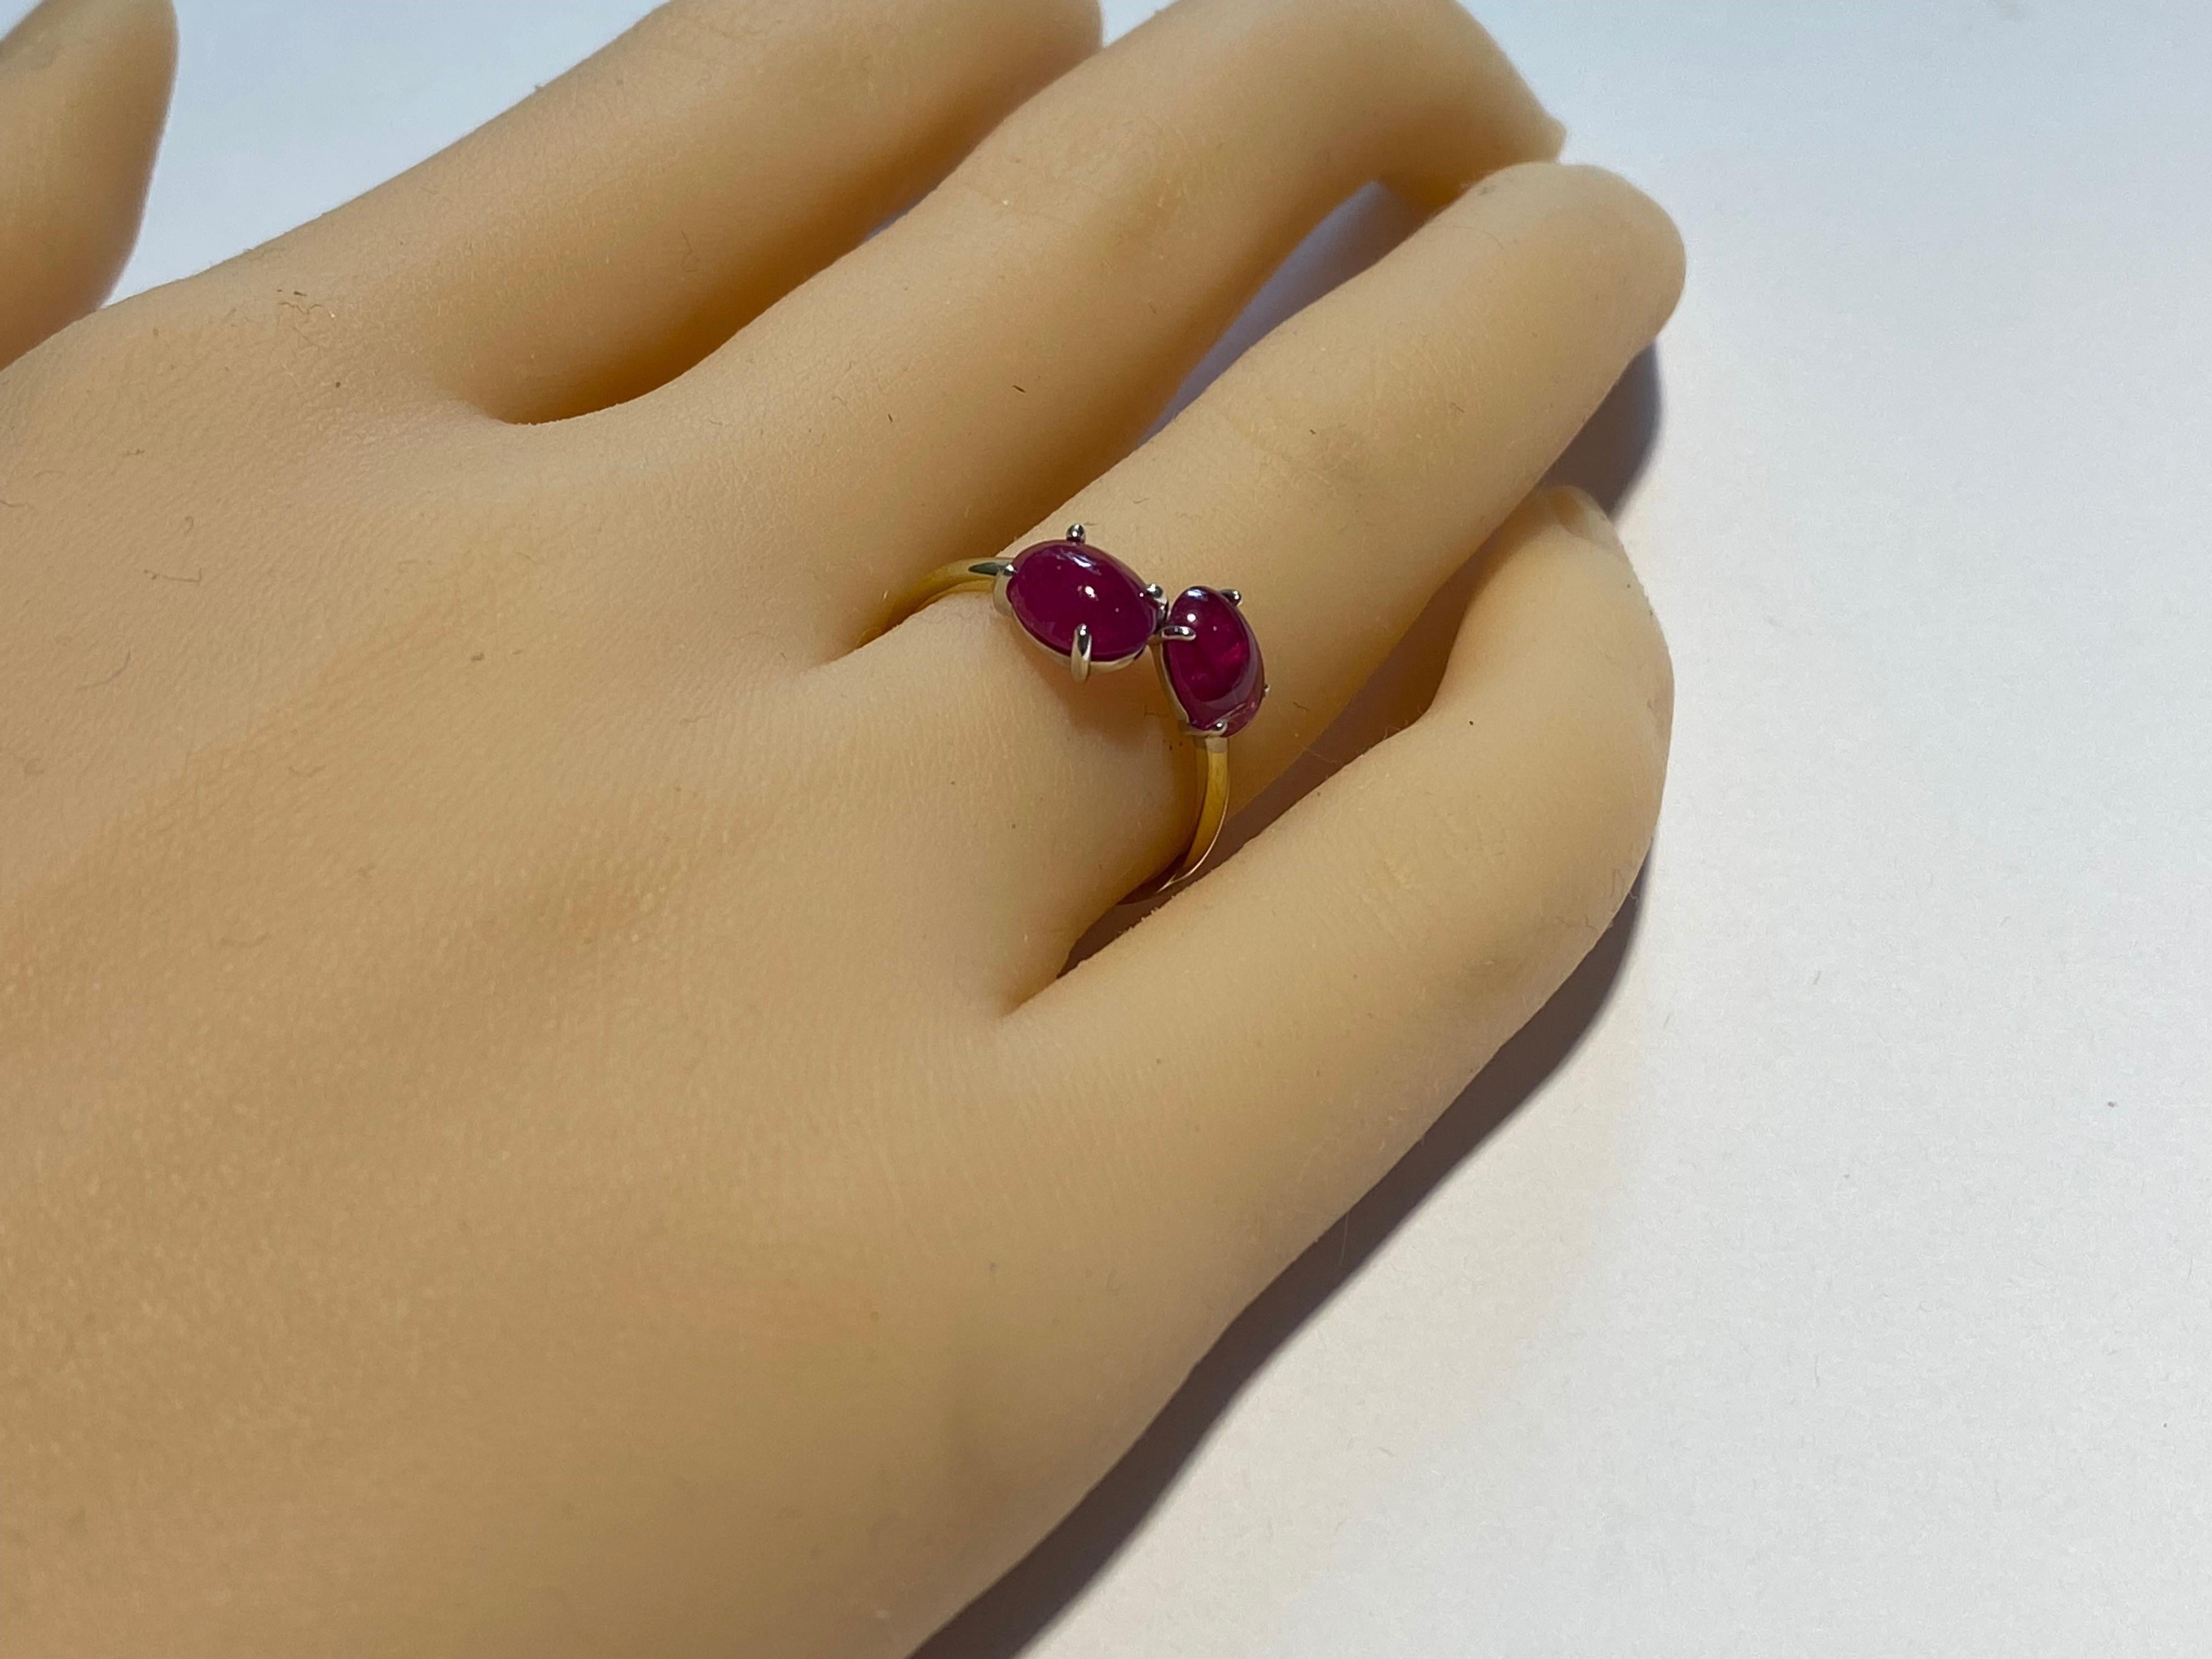 Fourteen Karats white and yellow gold double, two, cabochon ruby facing ring
Two cabochon Burma ruby weighing 3.90 carat
Rubies hue tone color is of a firebrick red                                                                       
Ring size